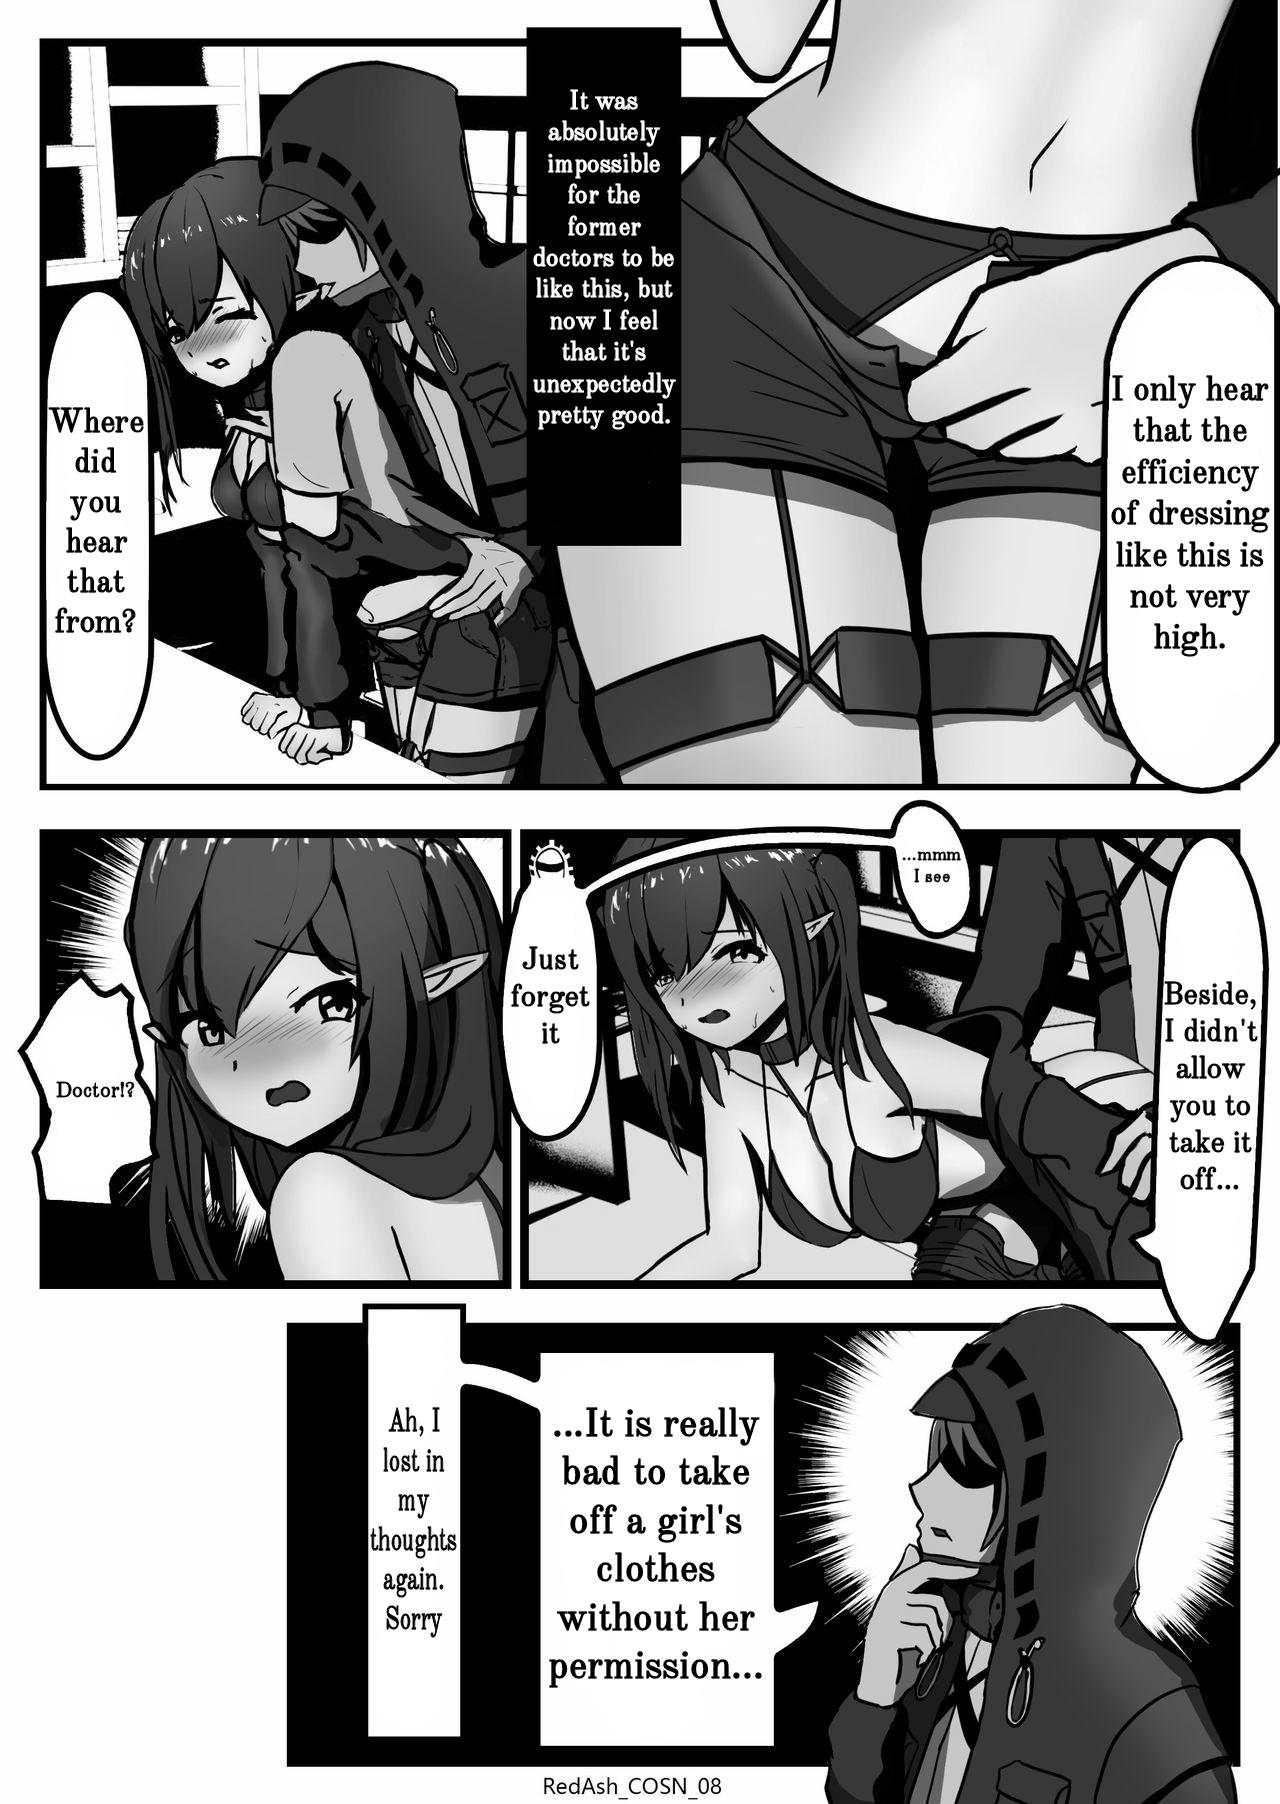 Girls Fucking Closure is On Sale Now! - Arknights Safado - Page 9